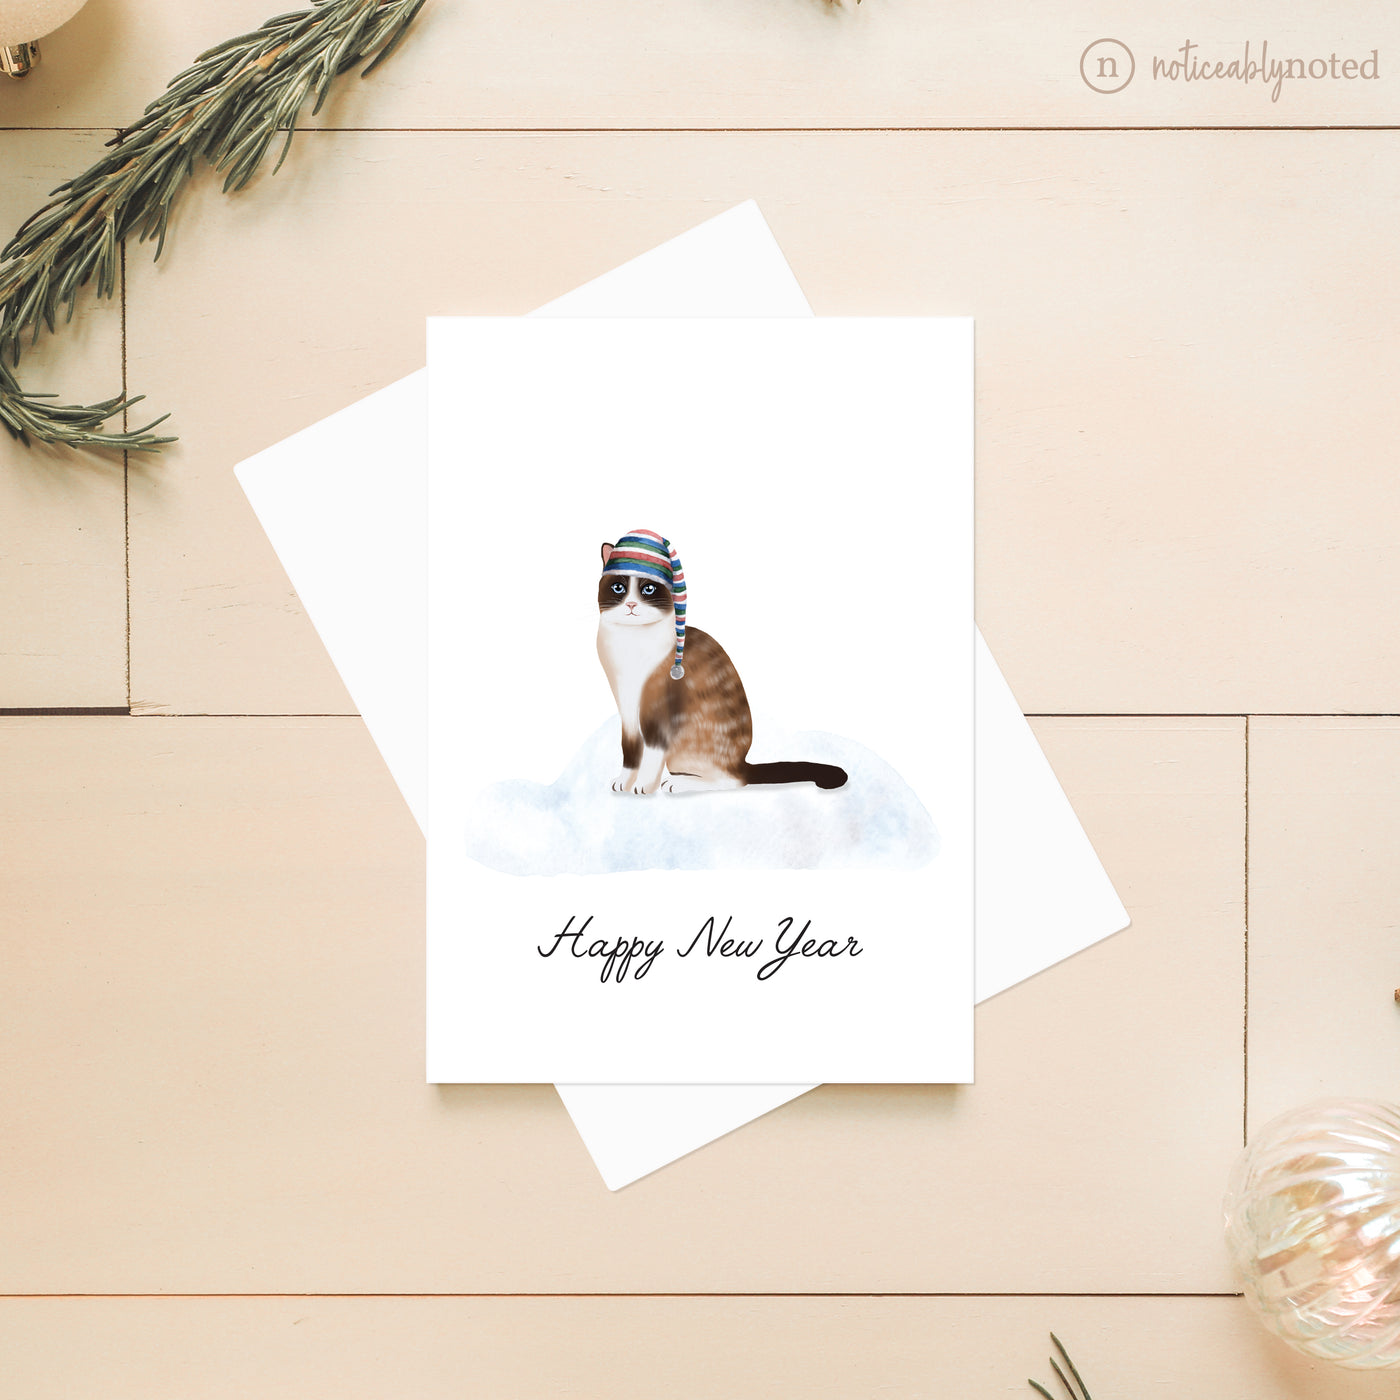 Snowshoe Holiday Card | Noticeably Noted